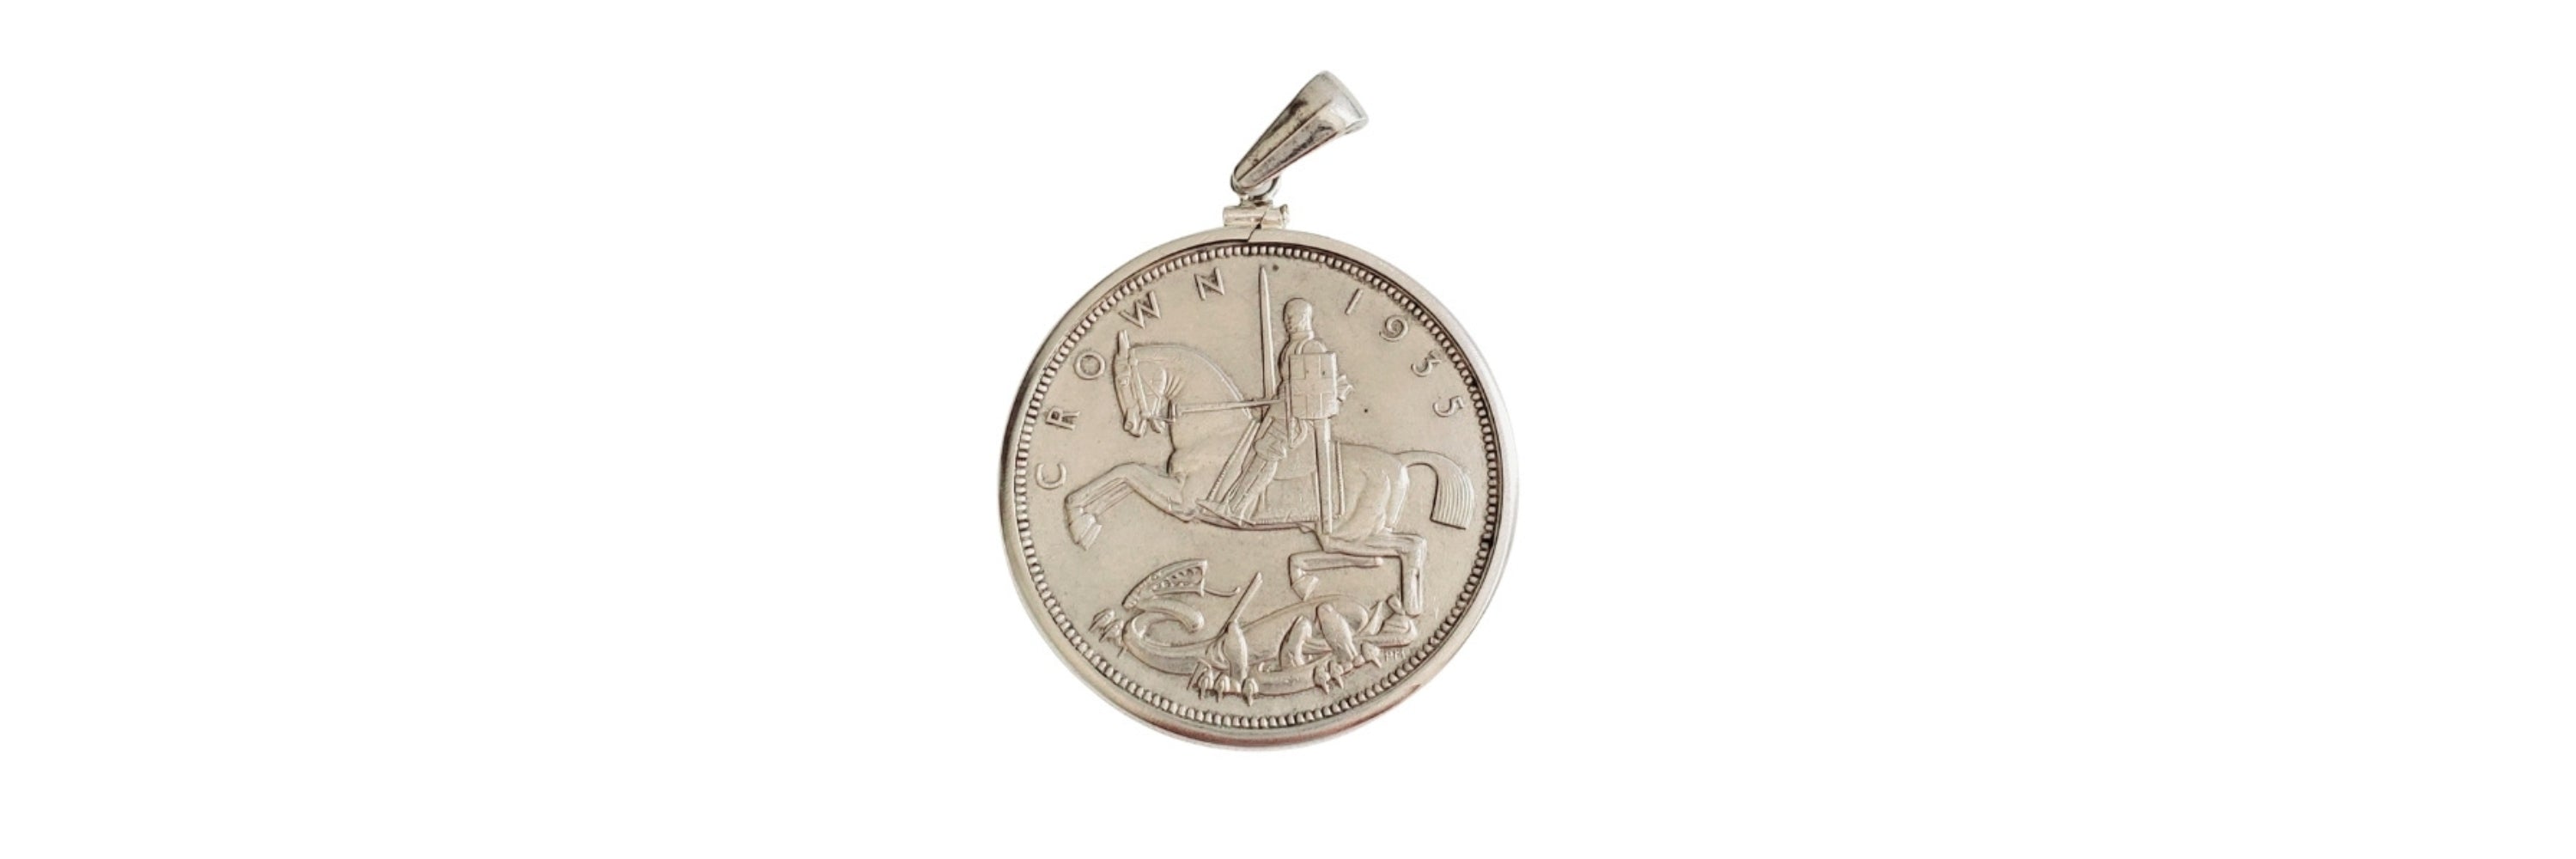 Equestrian inspired vintage coins like Rocking Horse Crown 1935 